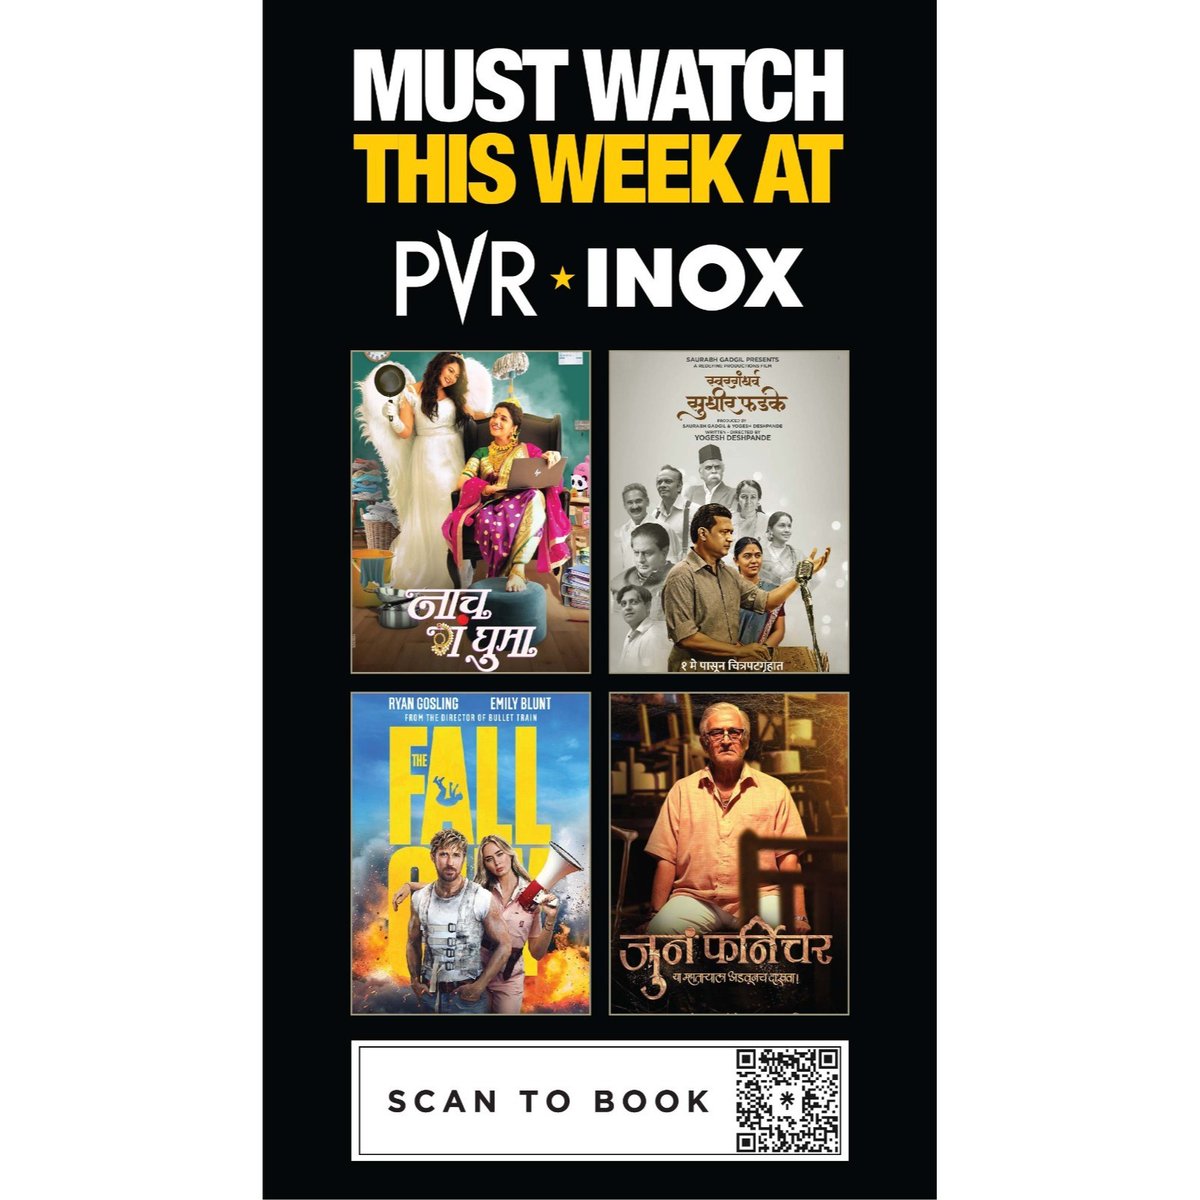 🎬 Must Watch This Week at PVR & INOX! 🍿✨
Grab Your Popcorn and Enjoy the Latest Blockbusters!

#MovieNight #PVR #MovieNight #PVR #inoxINOX #CCM #CityCentreMall #nashikkar #nashikcity